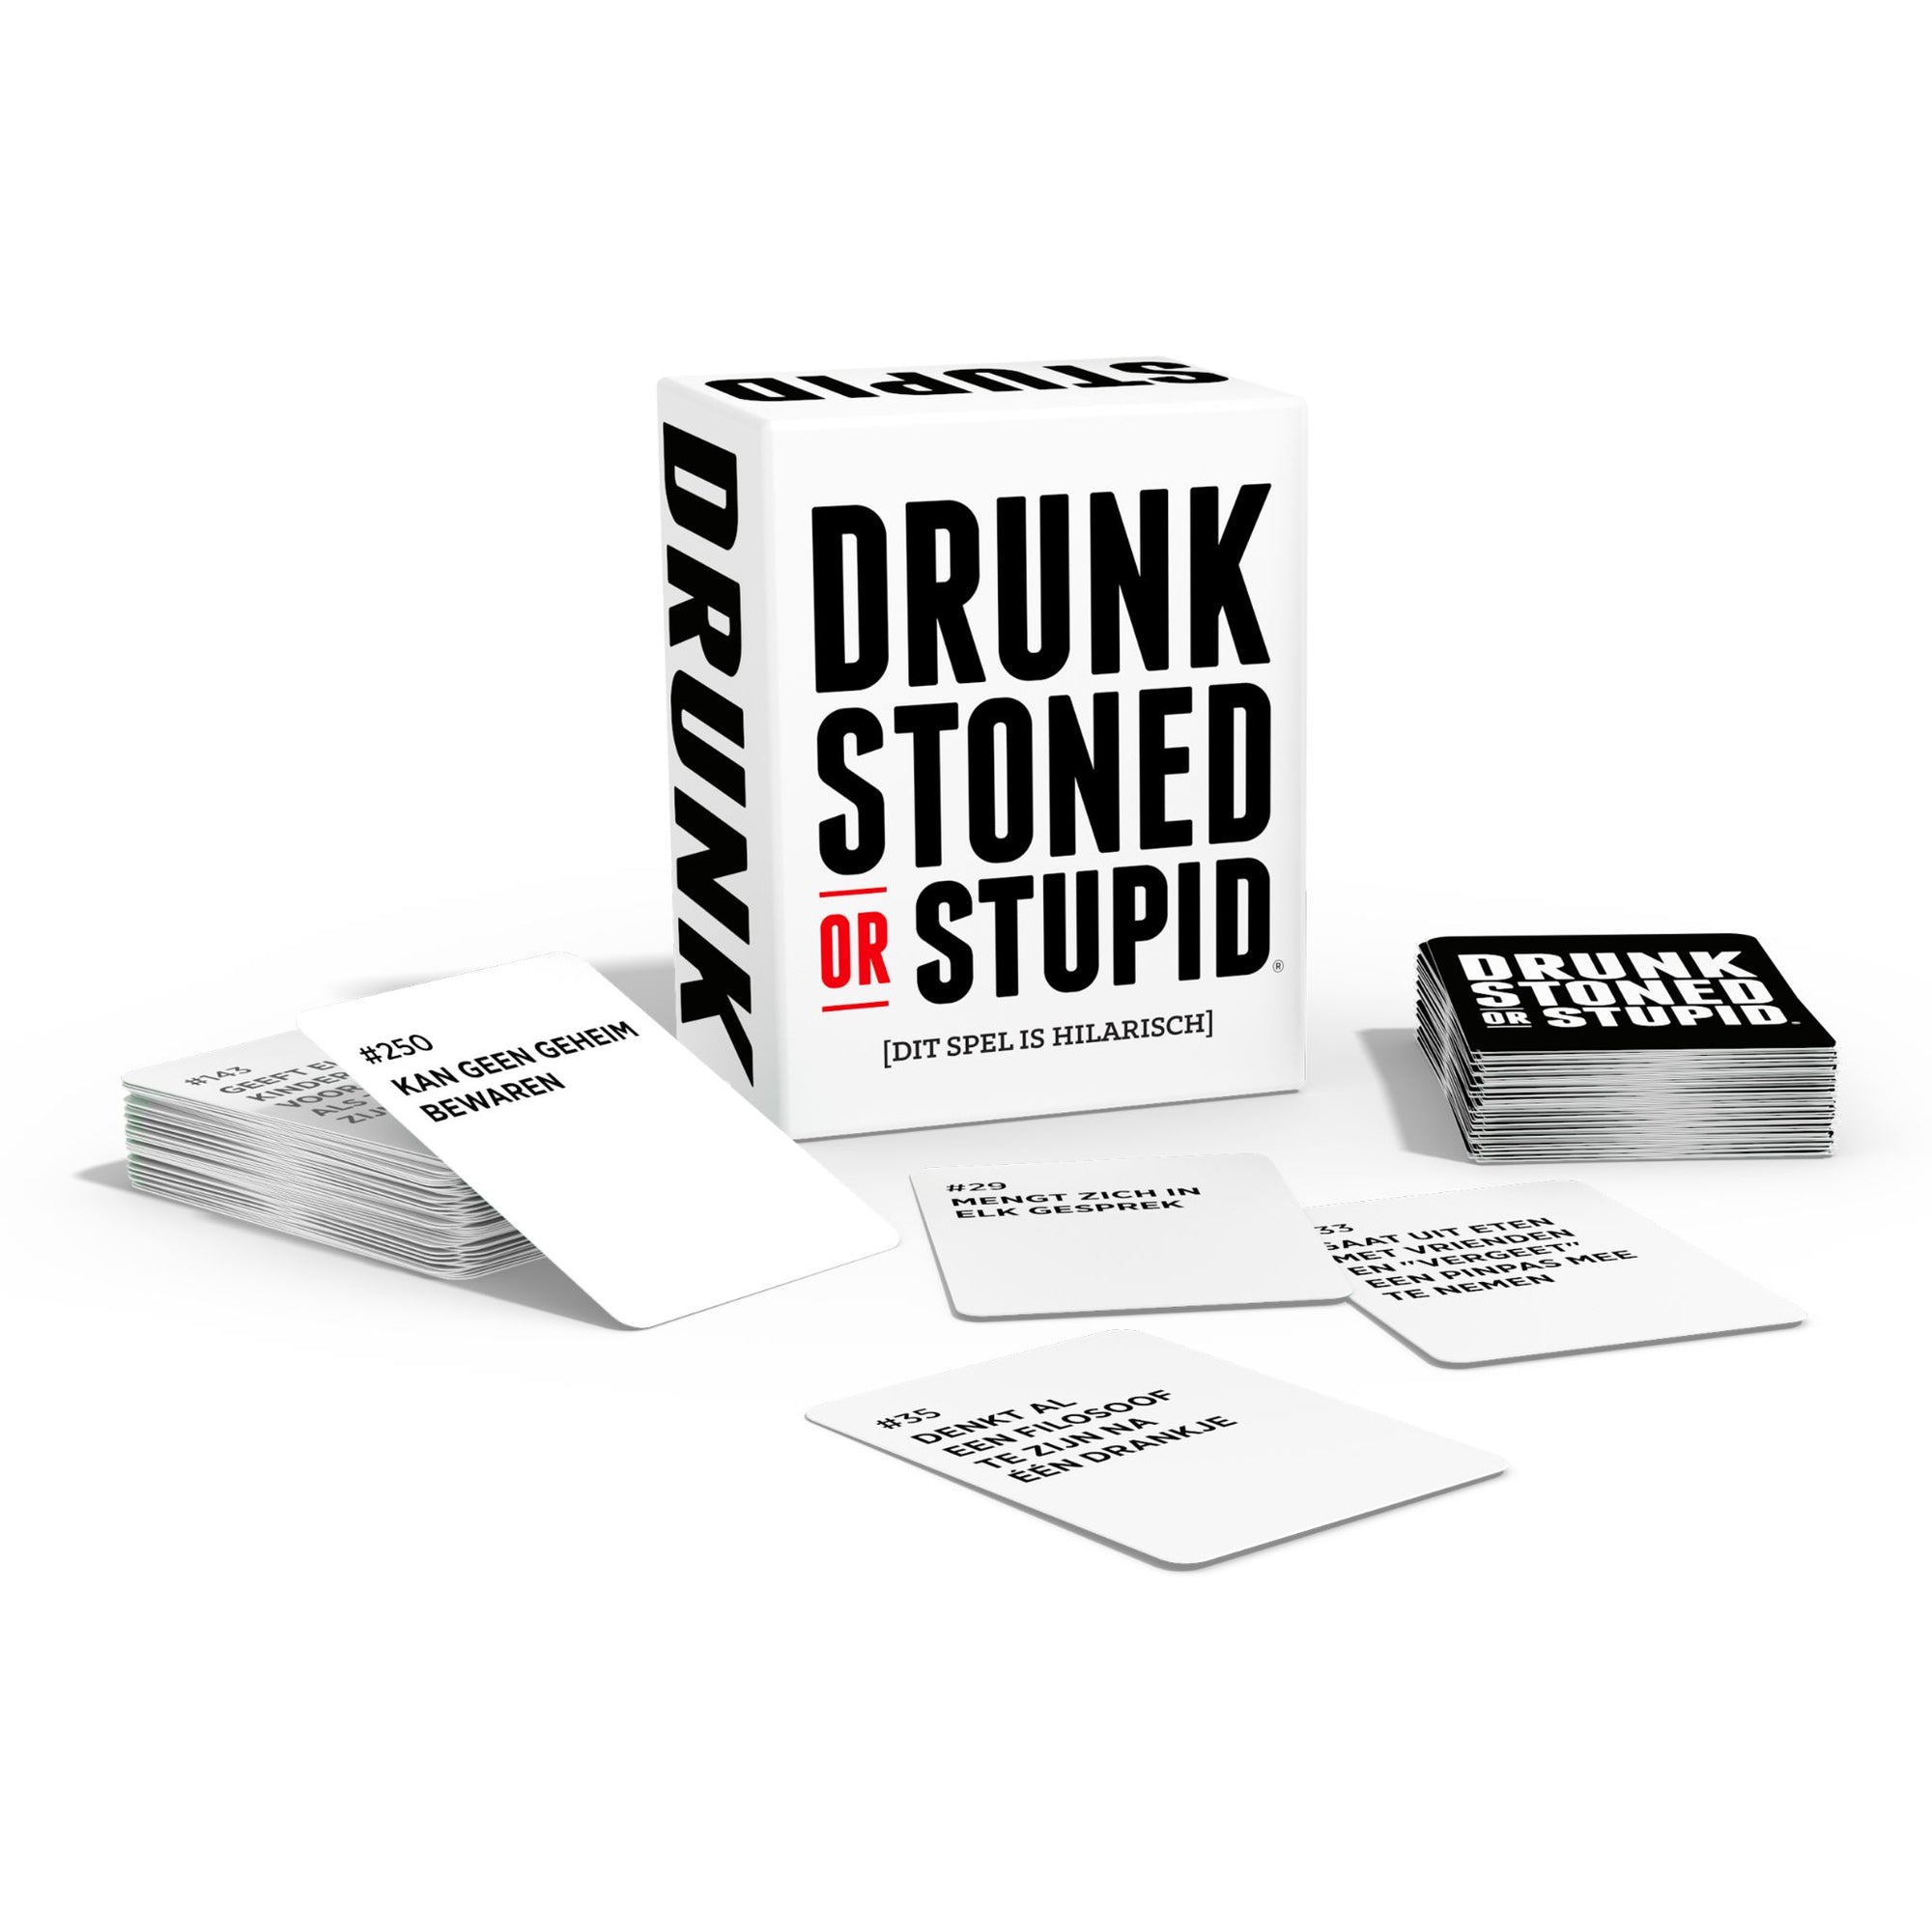 Game Drunk, Stoned or Stupid